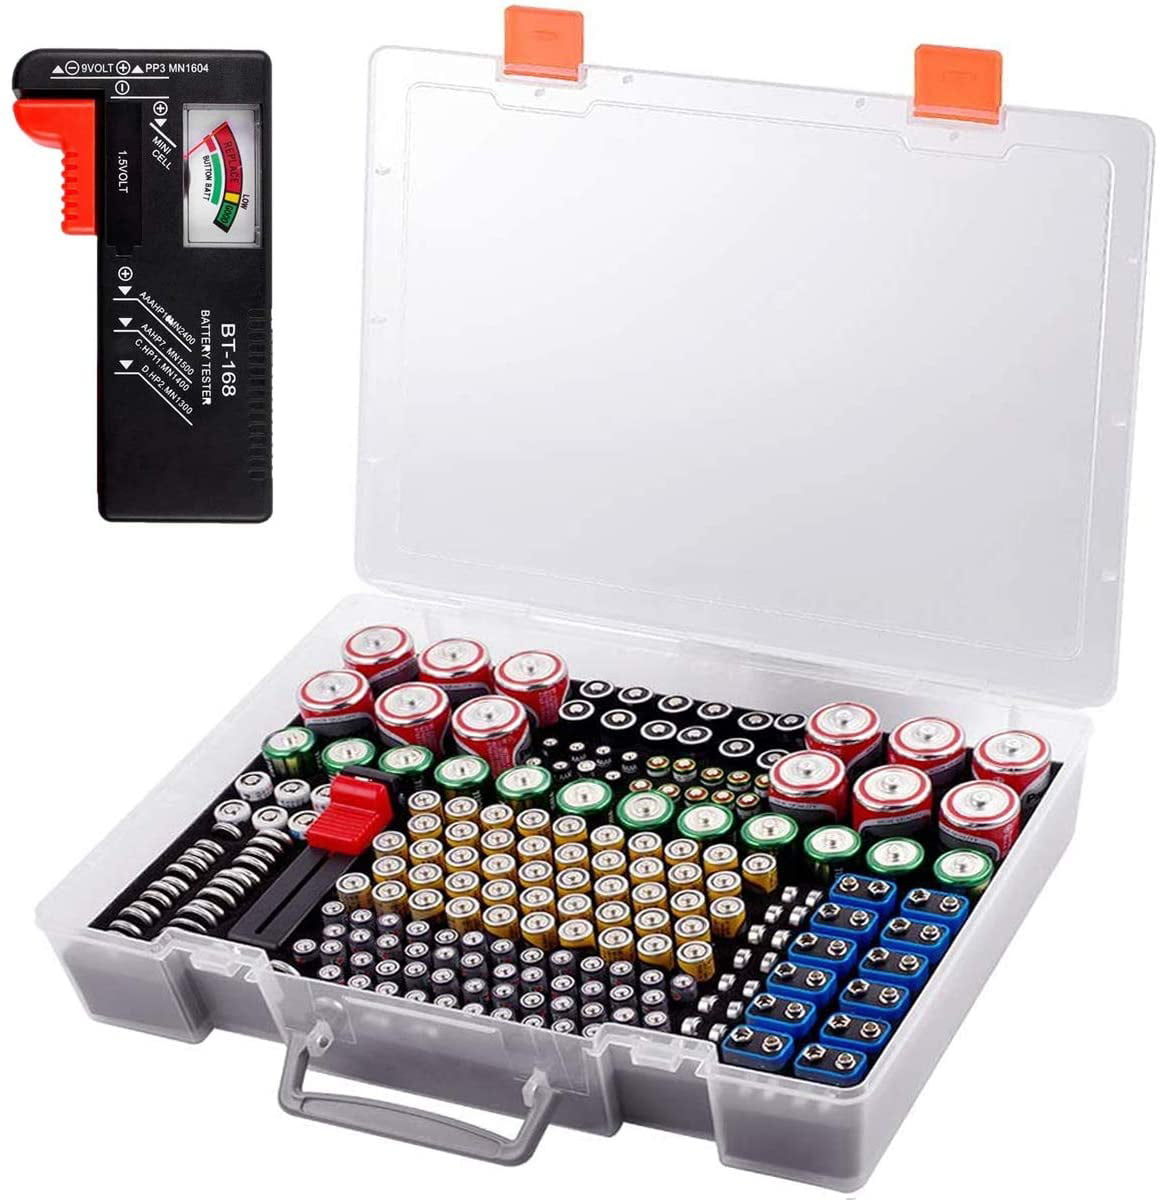 Garage Organization Holds 225 Batteries AA AAA C D Cell 9V 3V Lithium LR44 CR2 CR1632 CR2032 Batteries Storage Containers Box Case with Tester Checker BT-168 Battery Organizer Holder